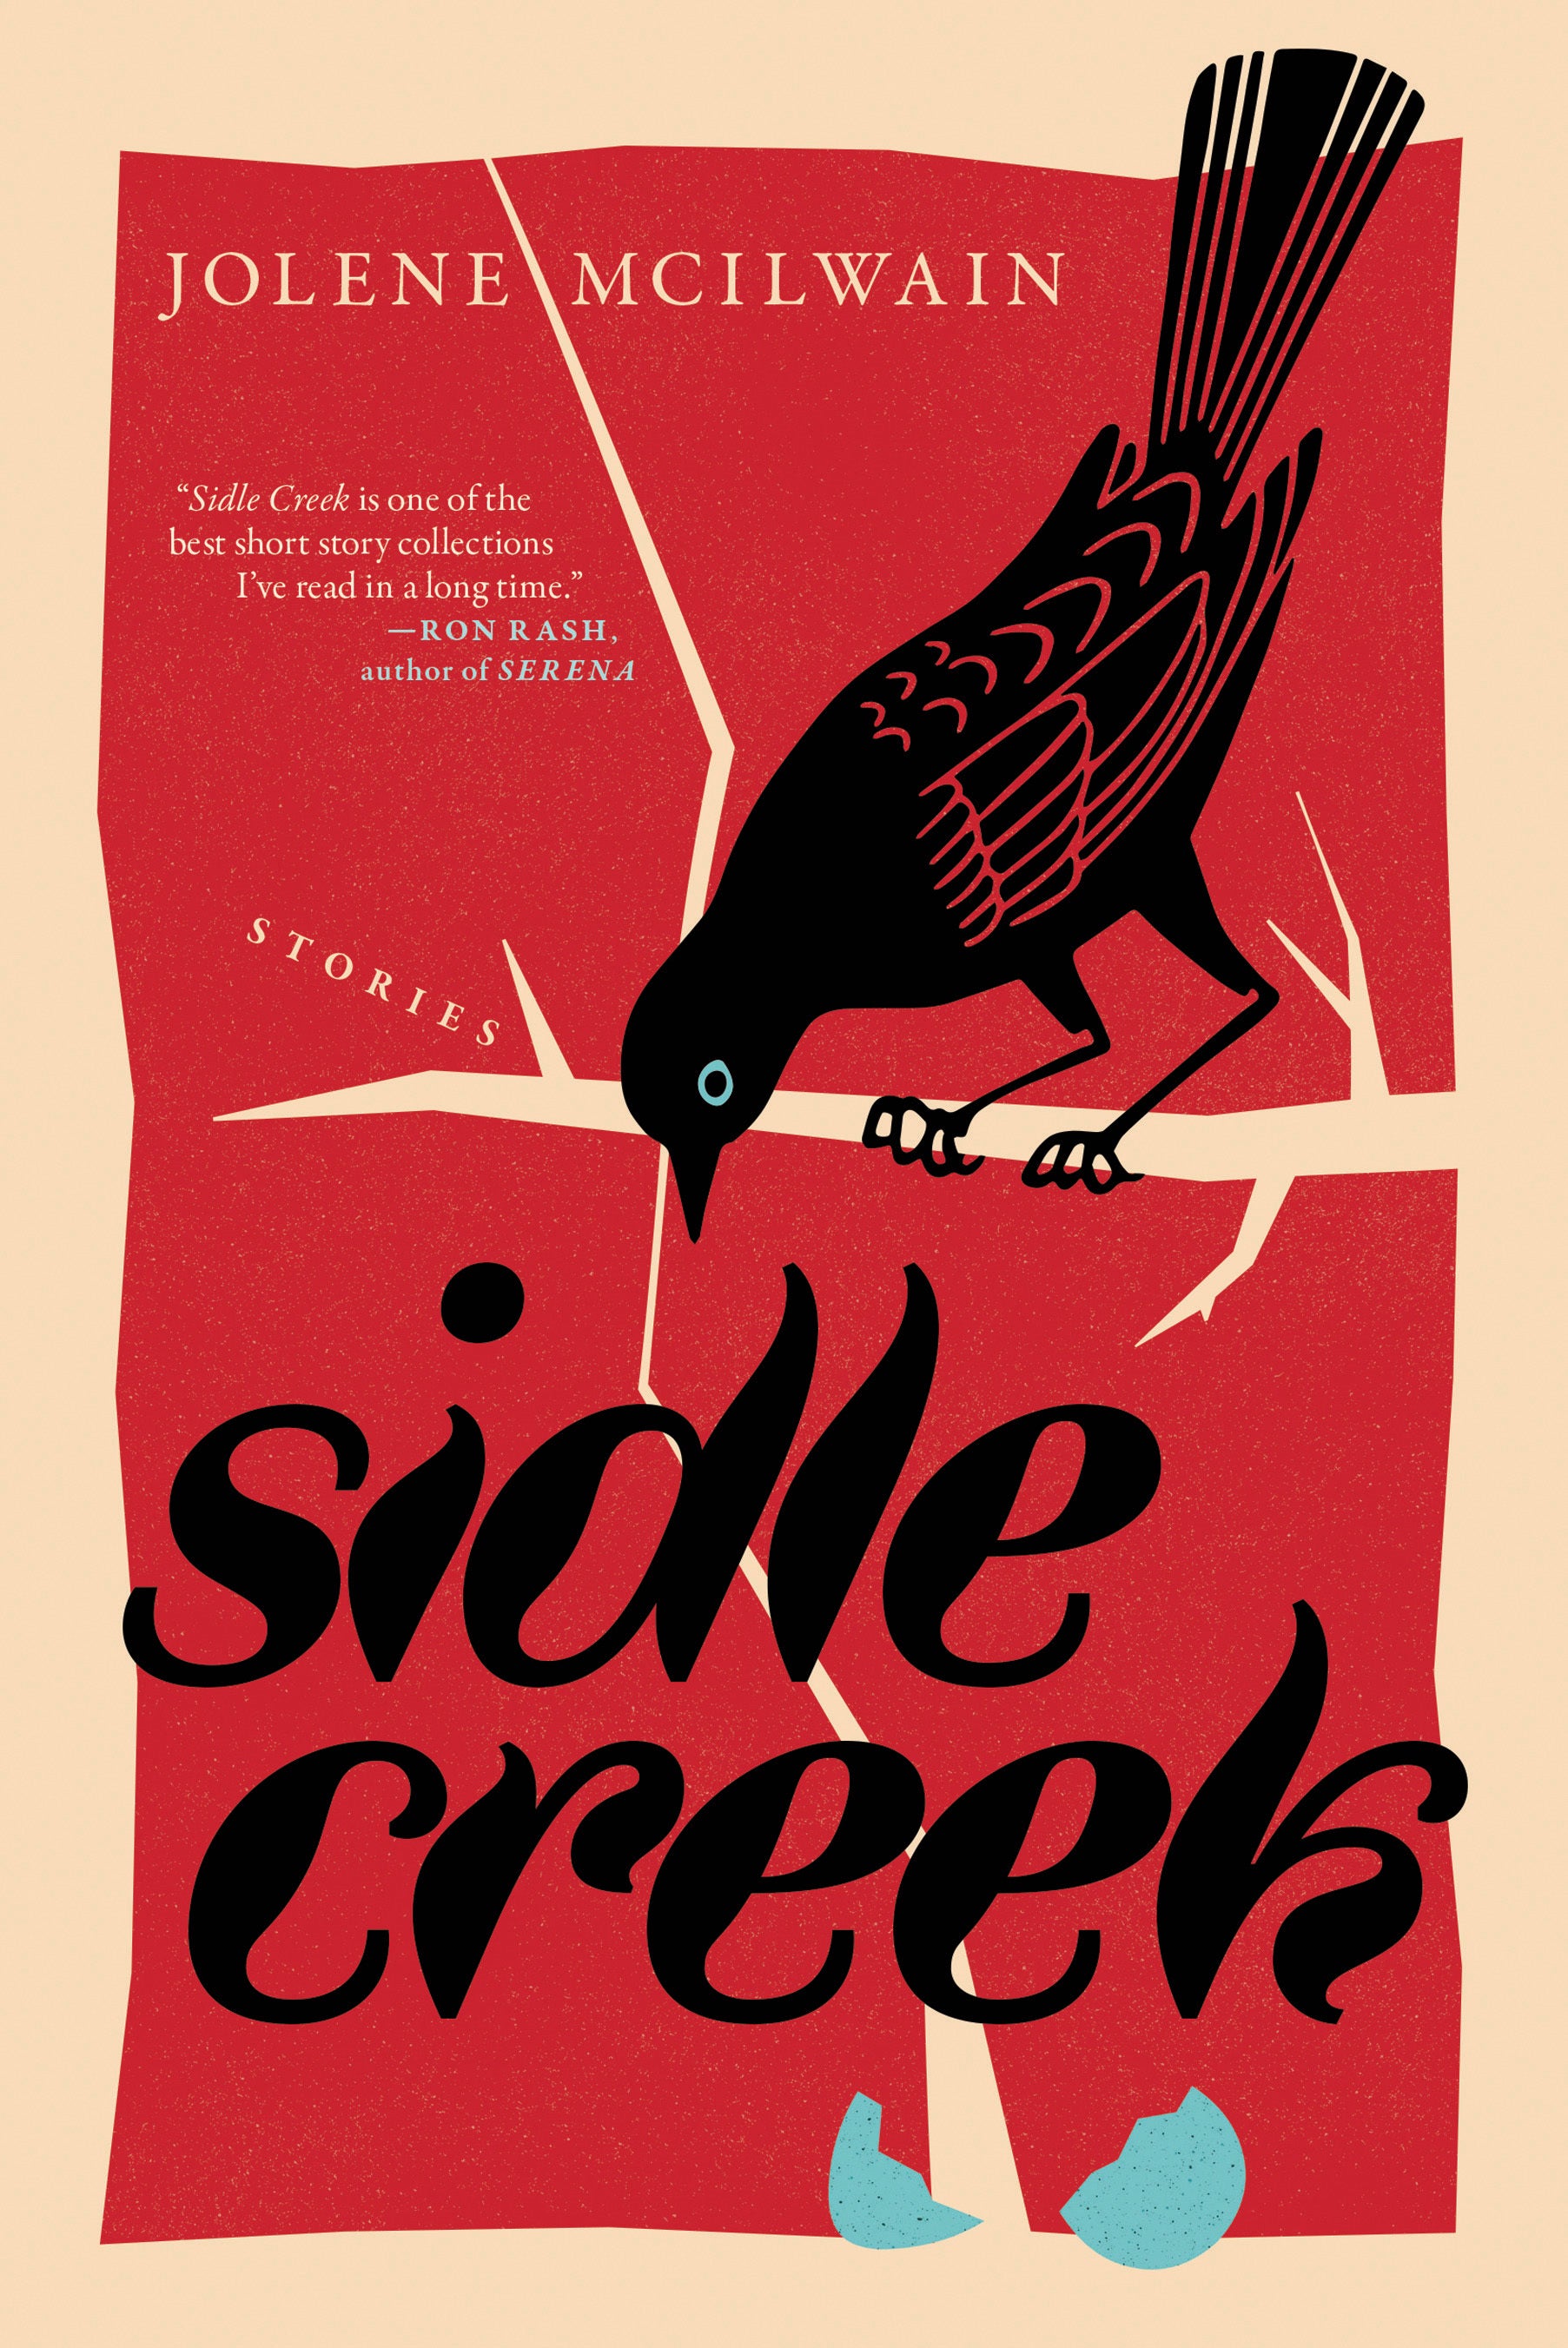 Book Review - Sidle Creek